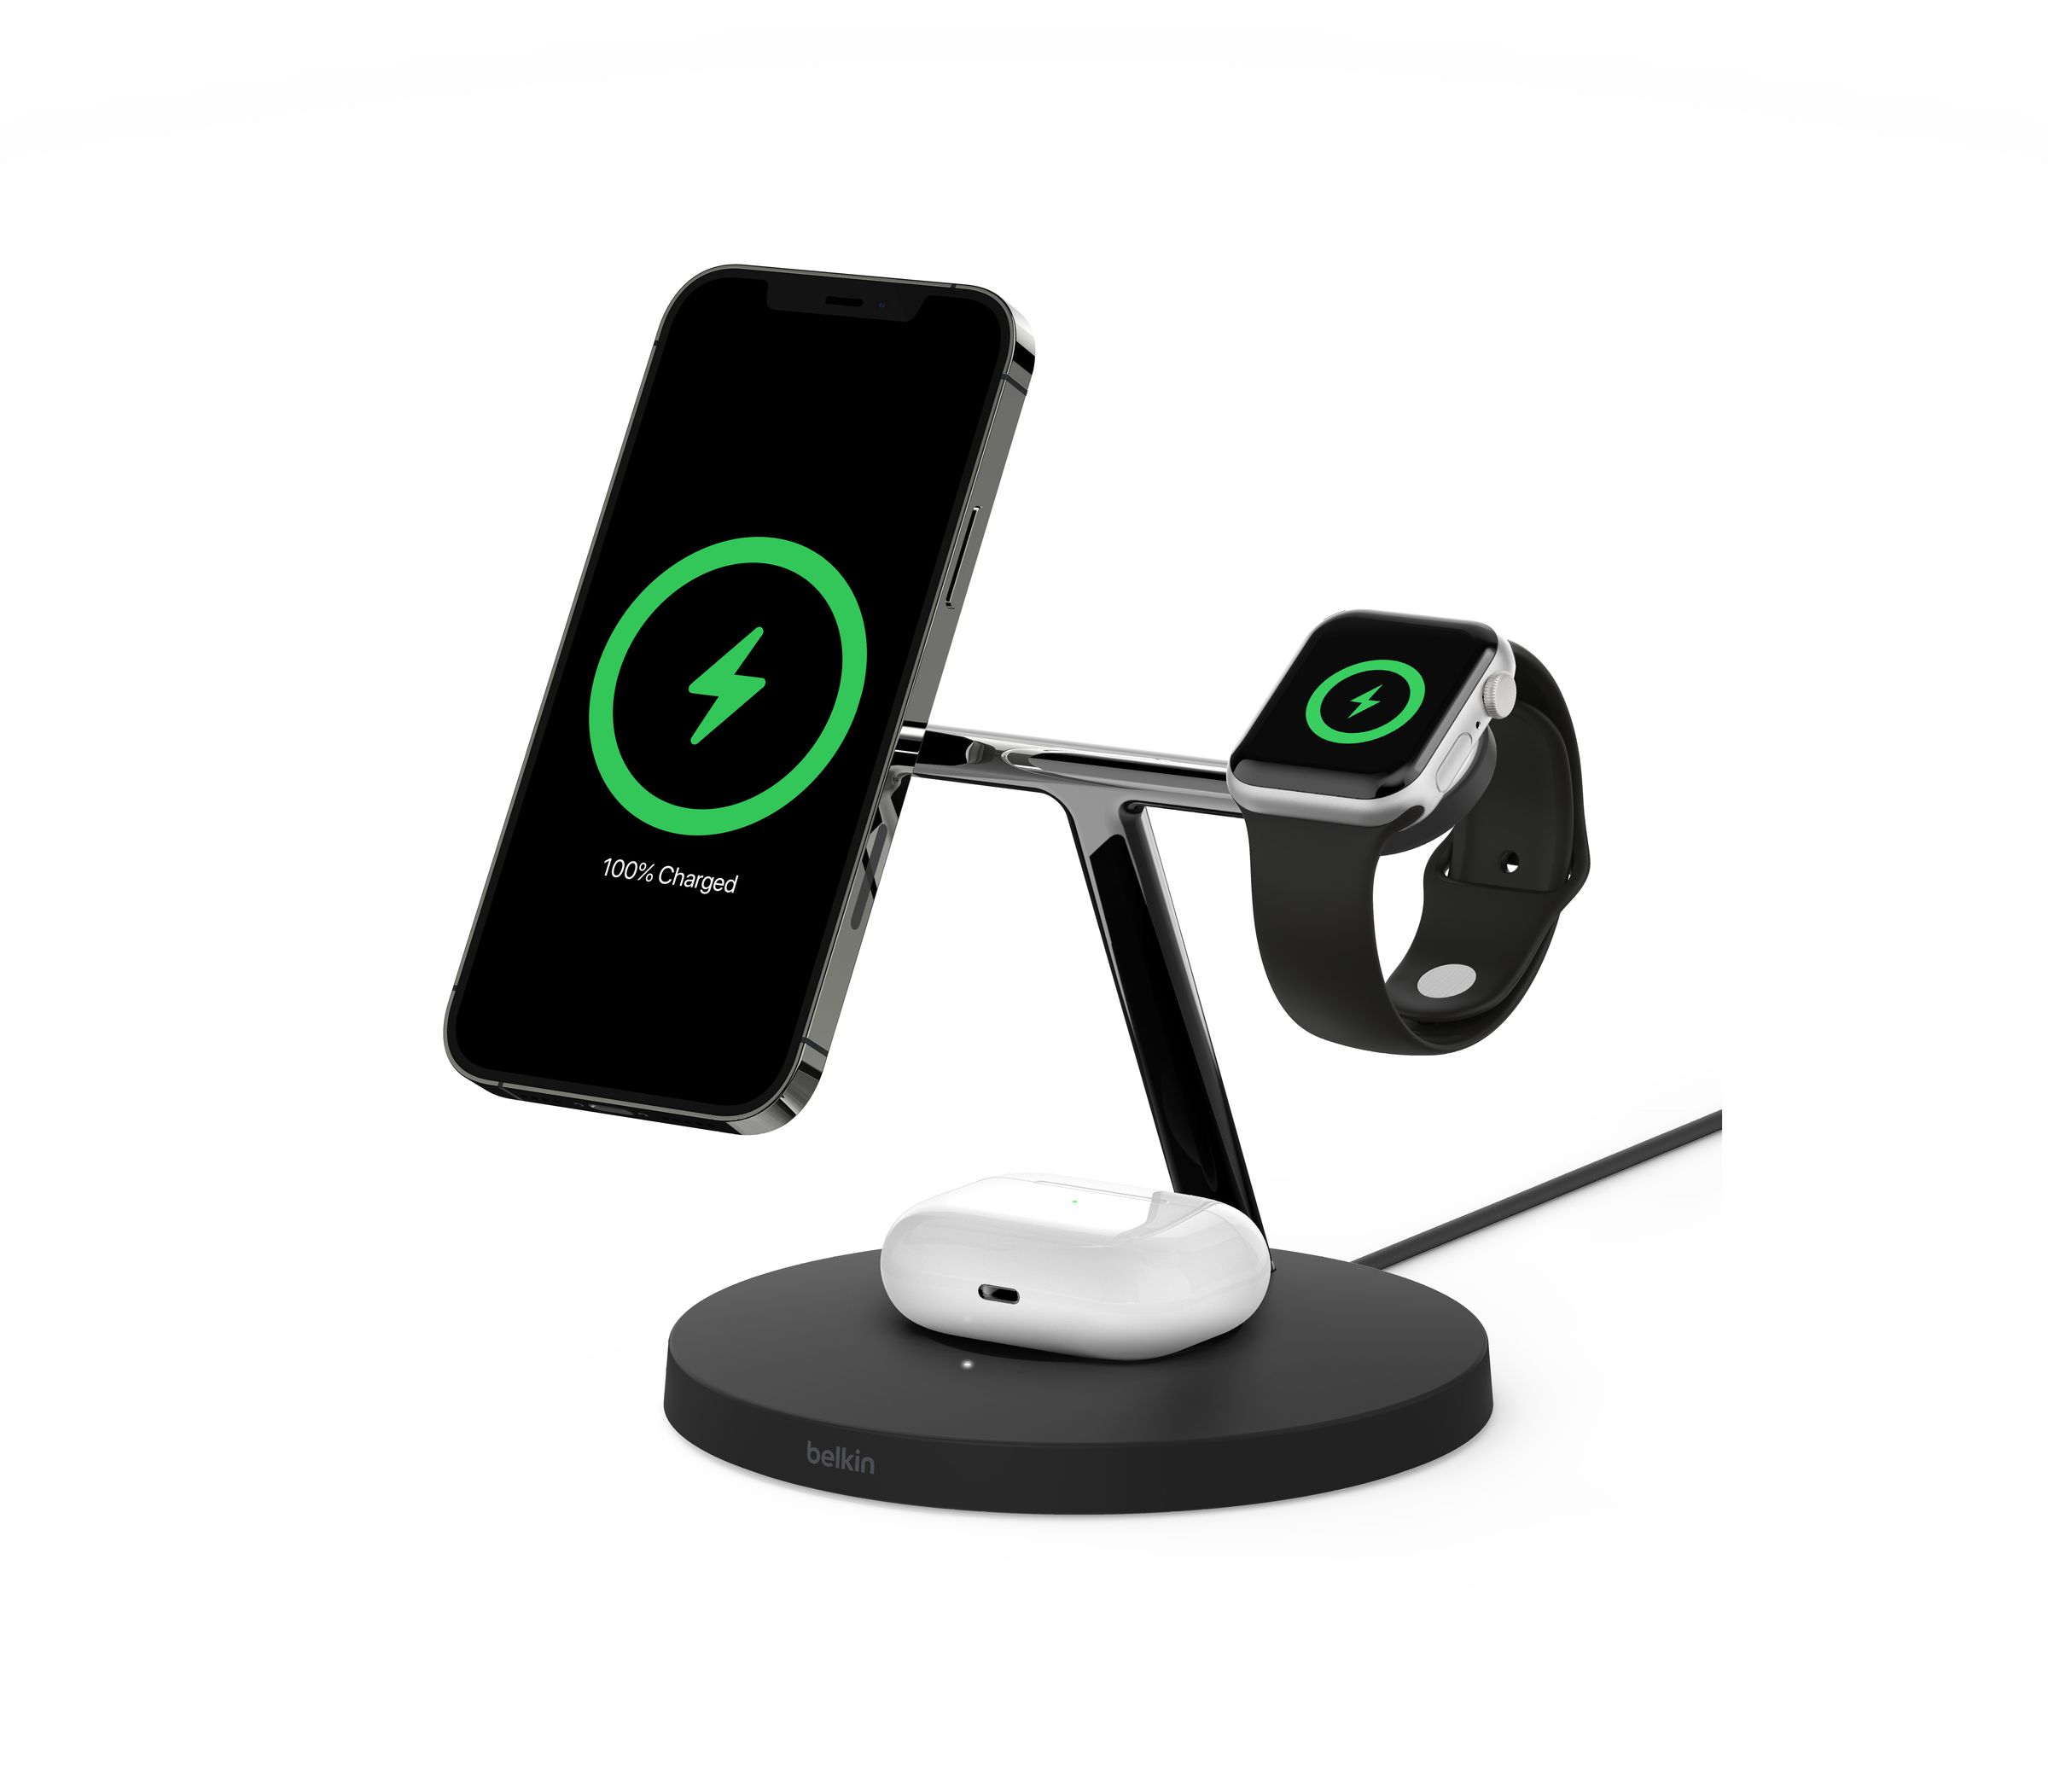 Picture of a Belkin charger with spots for the iPhone and Apple Watch, as well as a standard Qi charging pad.